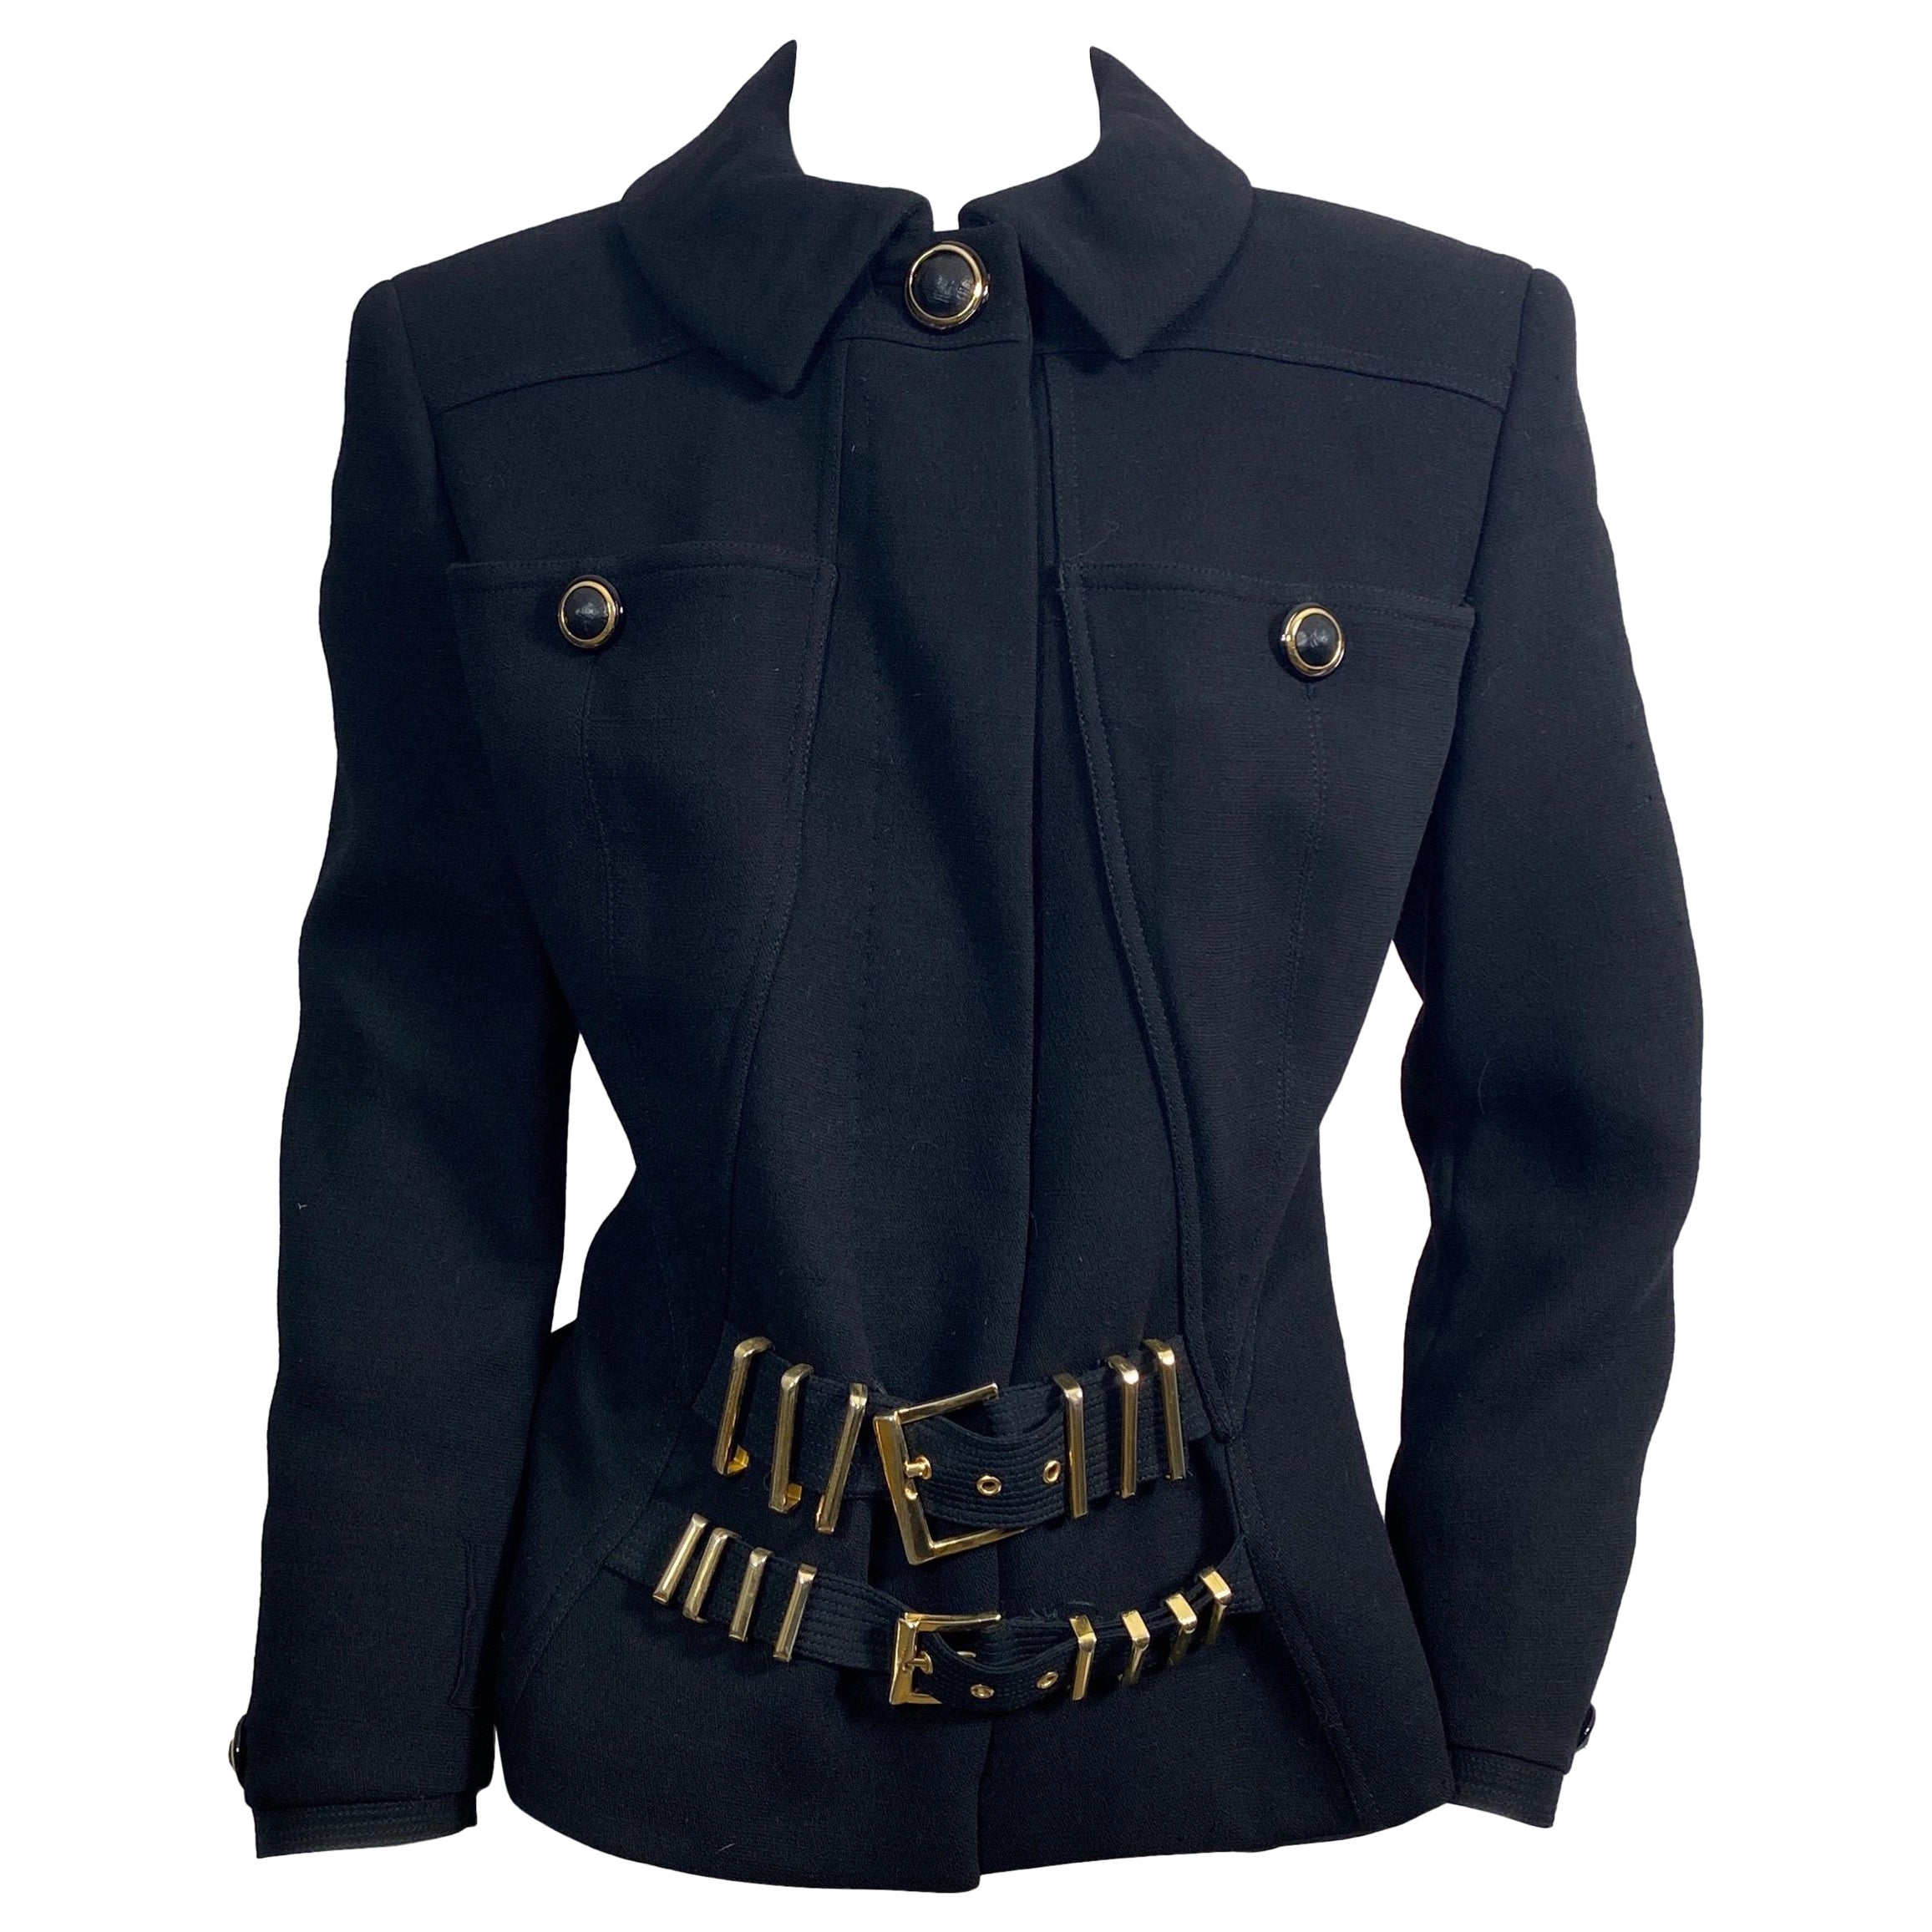 Gianni Versace Couture F/W 1992 Runway S&M Bondage Black Jacket-Size 6 For Sale